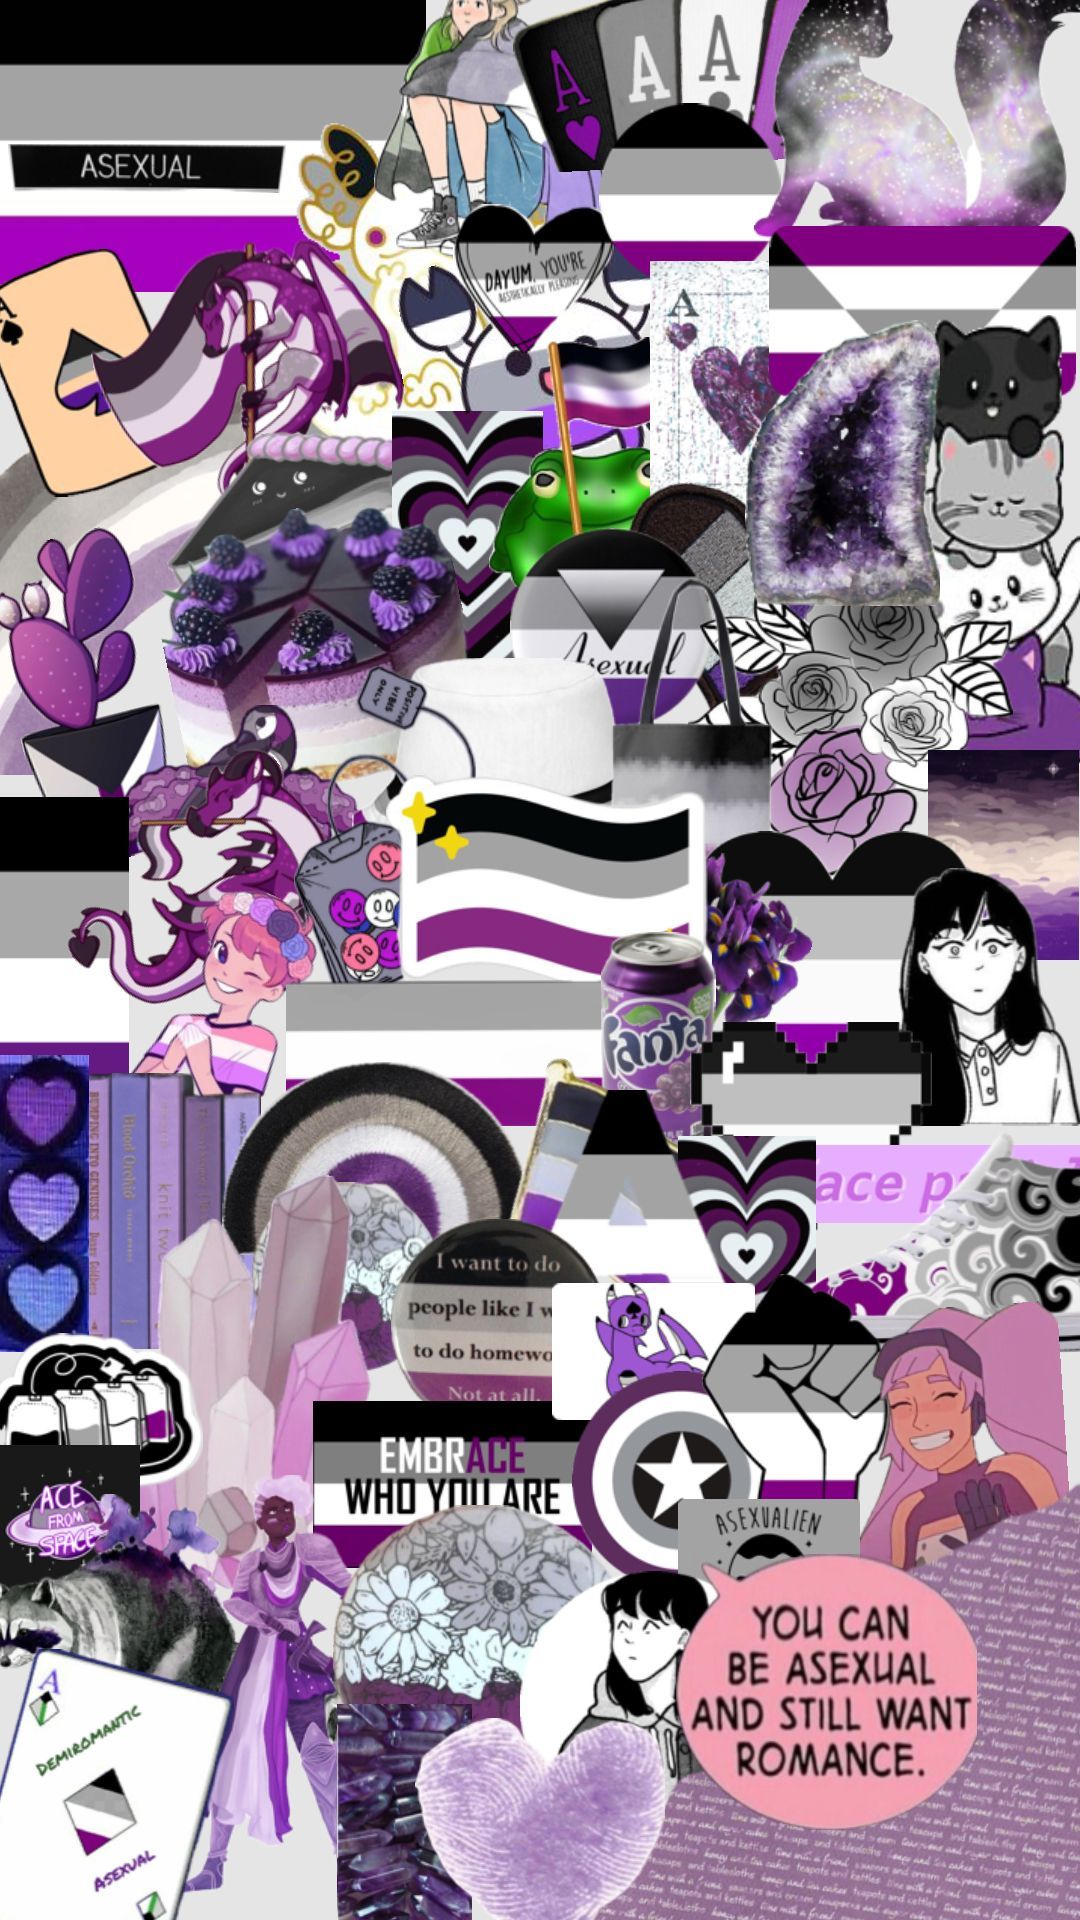 Another collage I made for my phone, this time with a purple and black theme. - Asexual